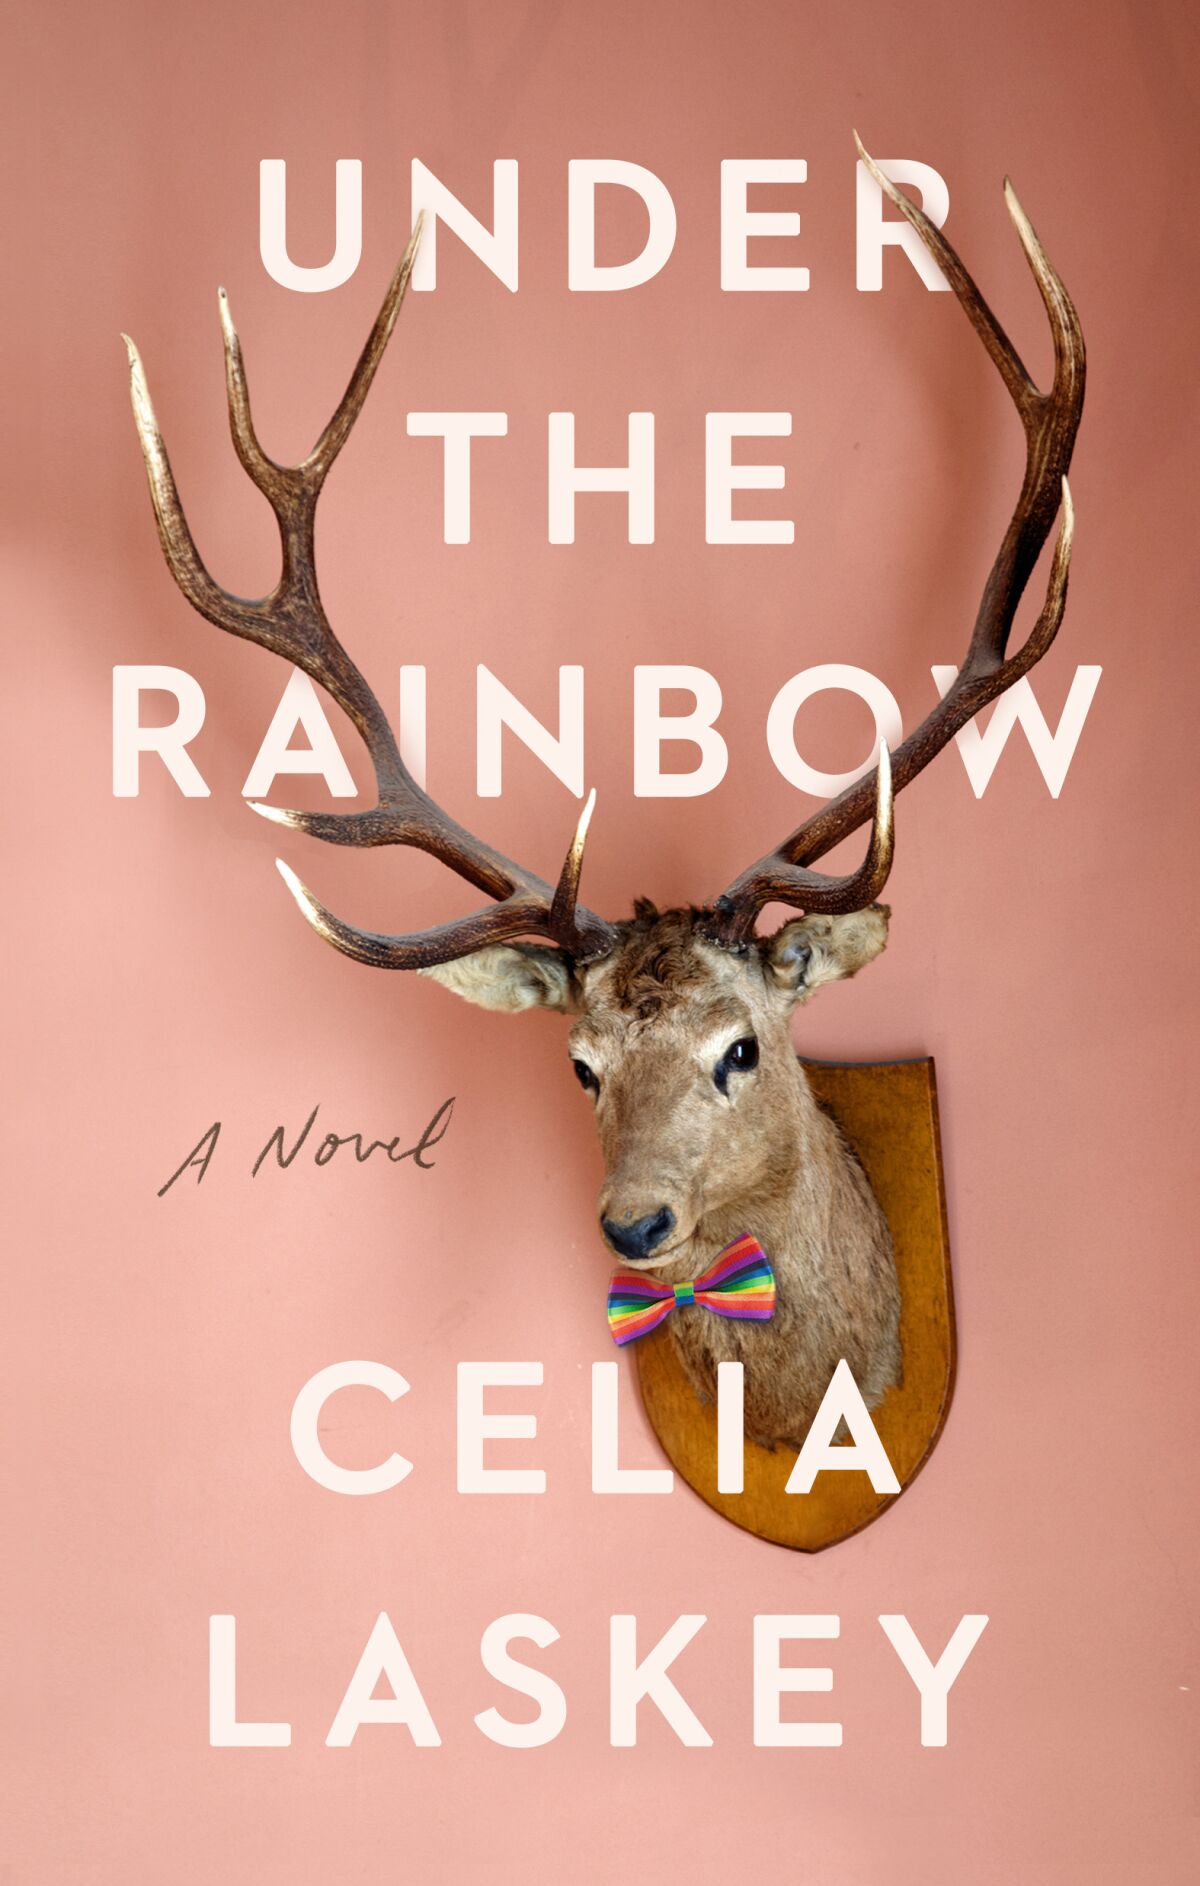 A book cover for "Under the Rainbow," by Celia Laskey